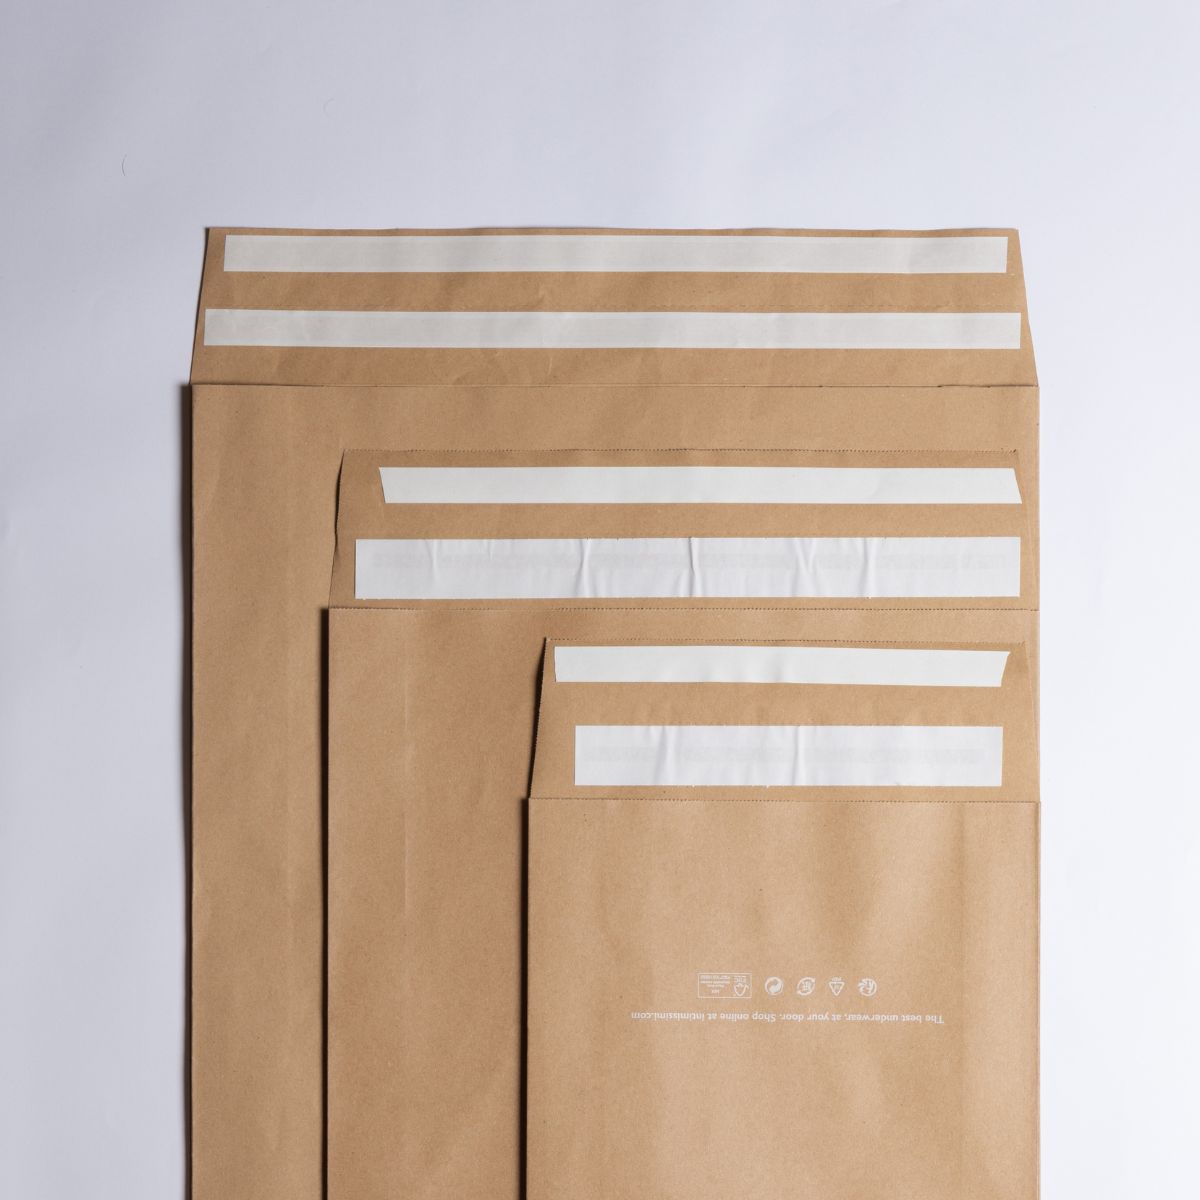 Paper bag for e-commerce delivery - dimensions